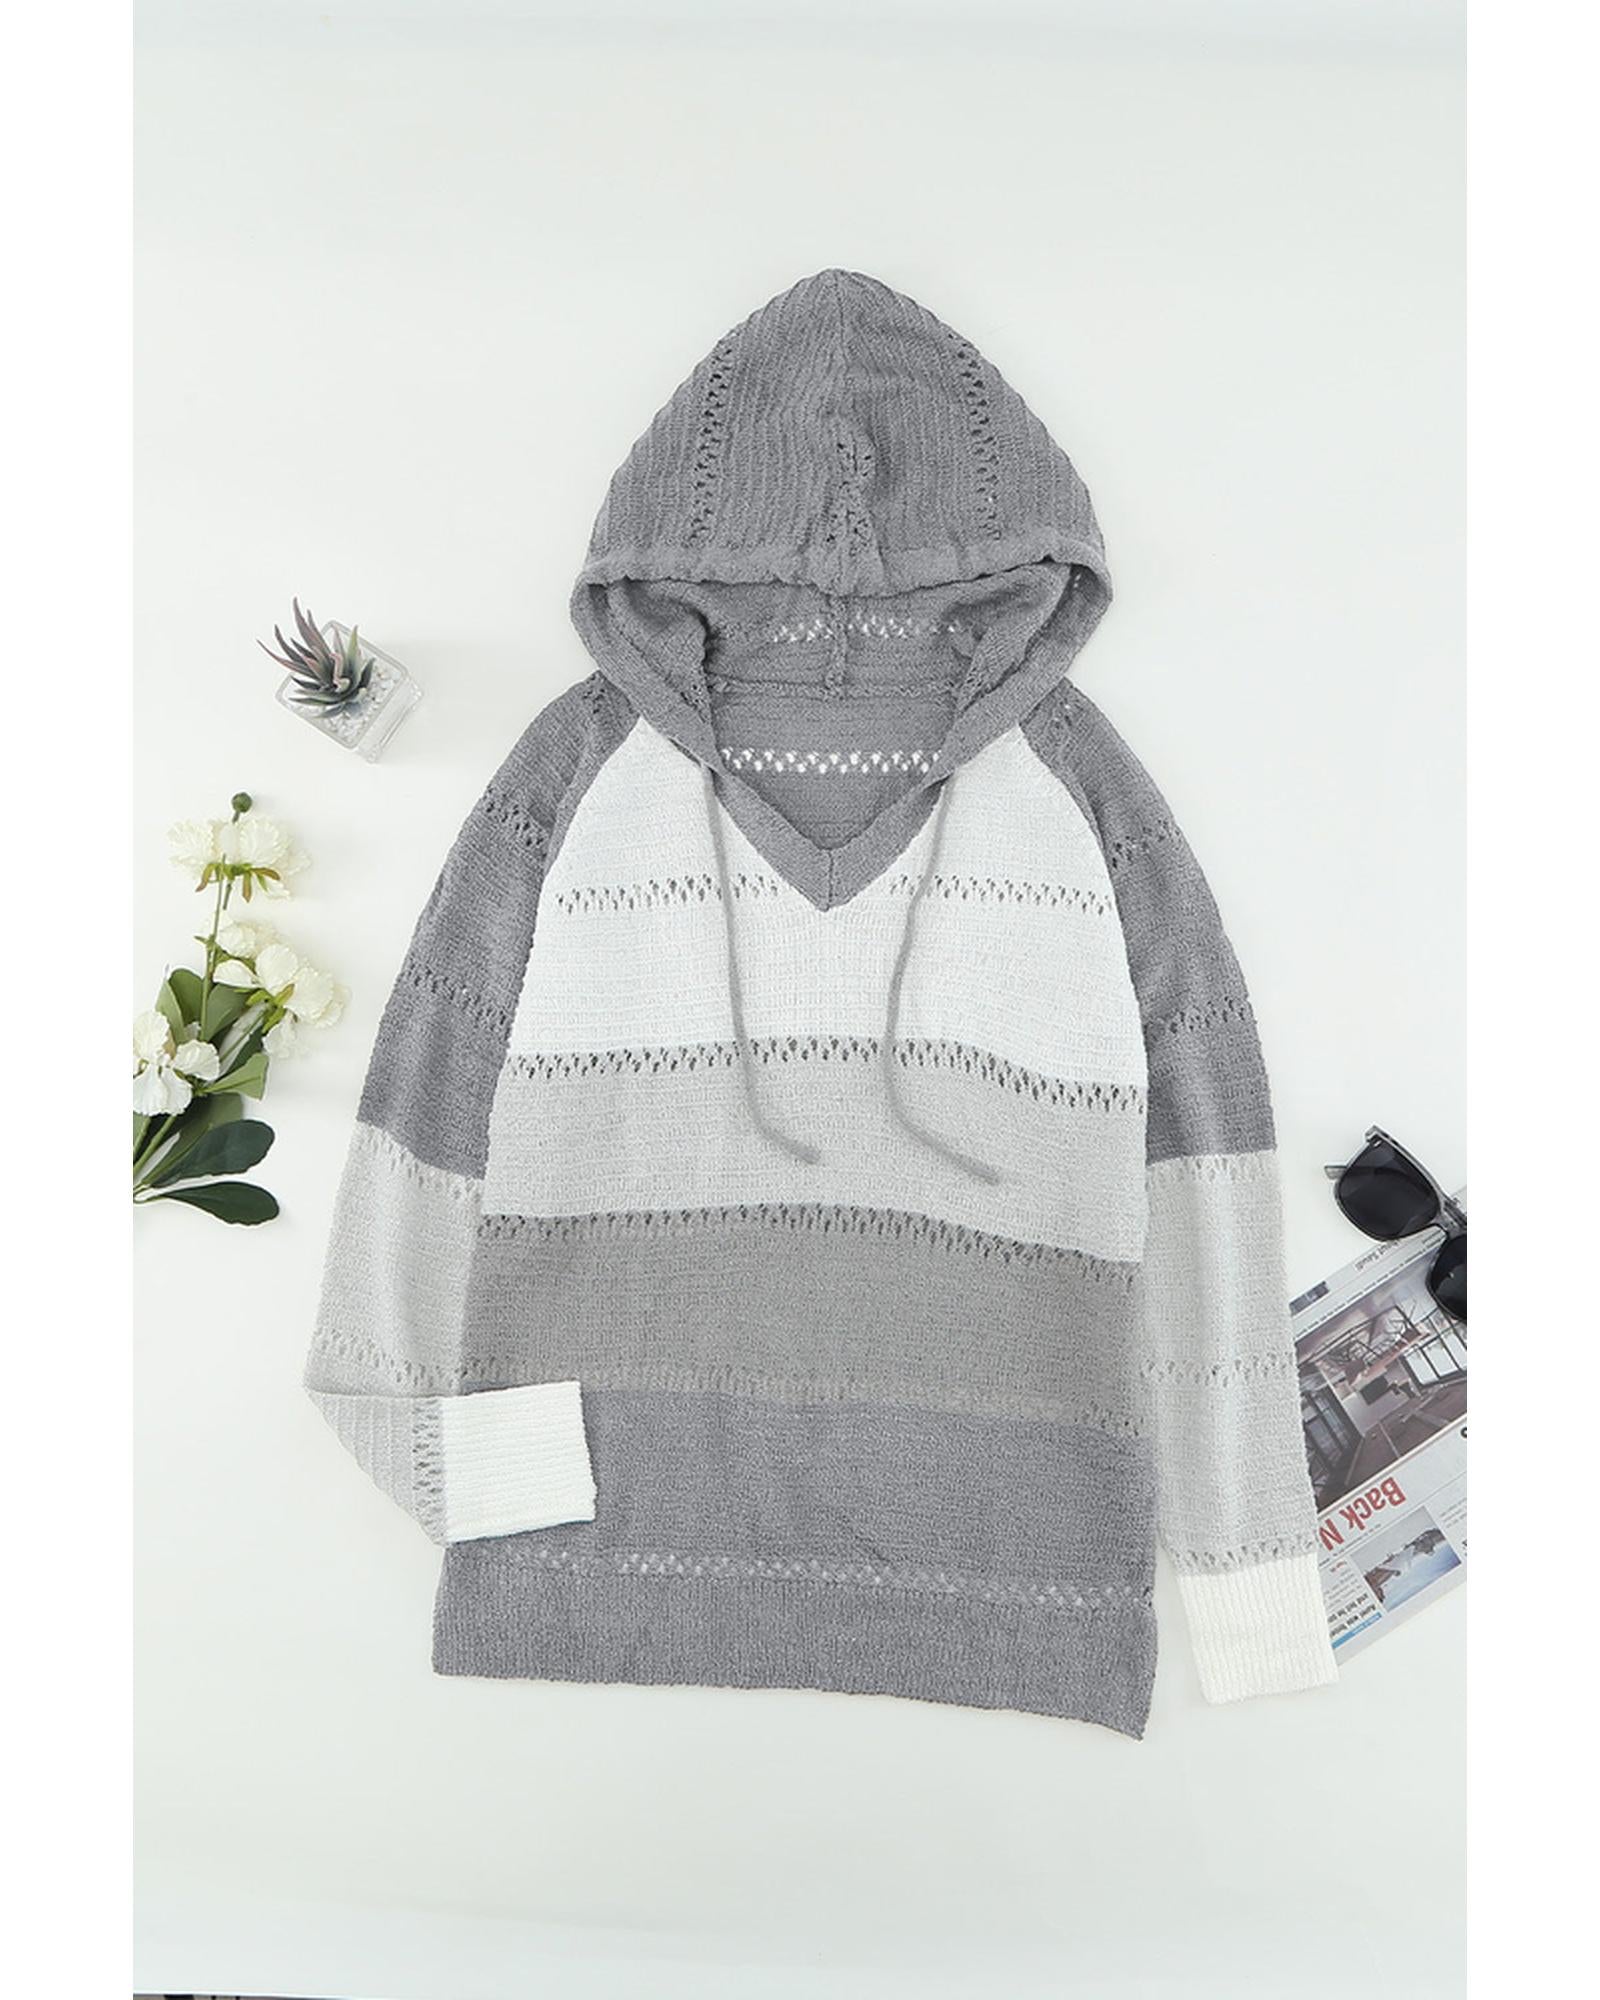 Azura Exchange Knitted Hoodie for Beach Bonfires - M